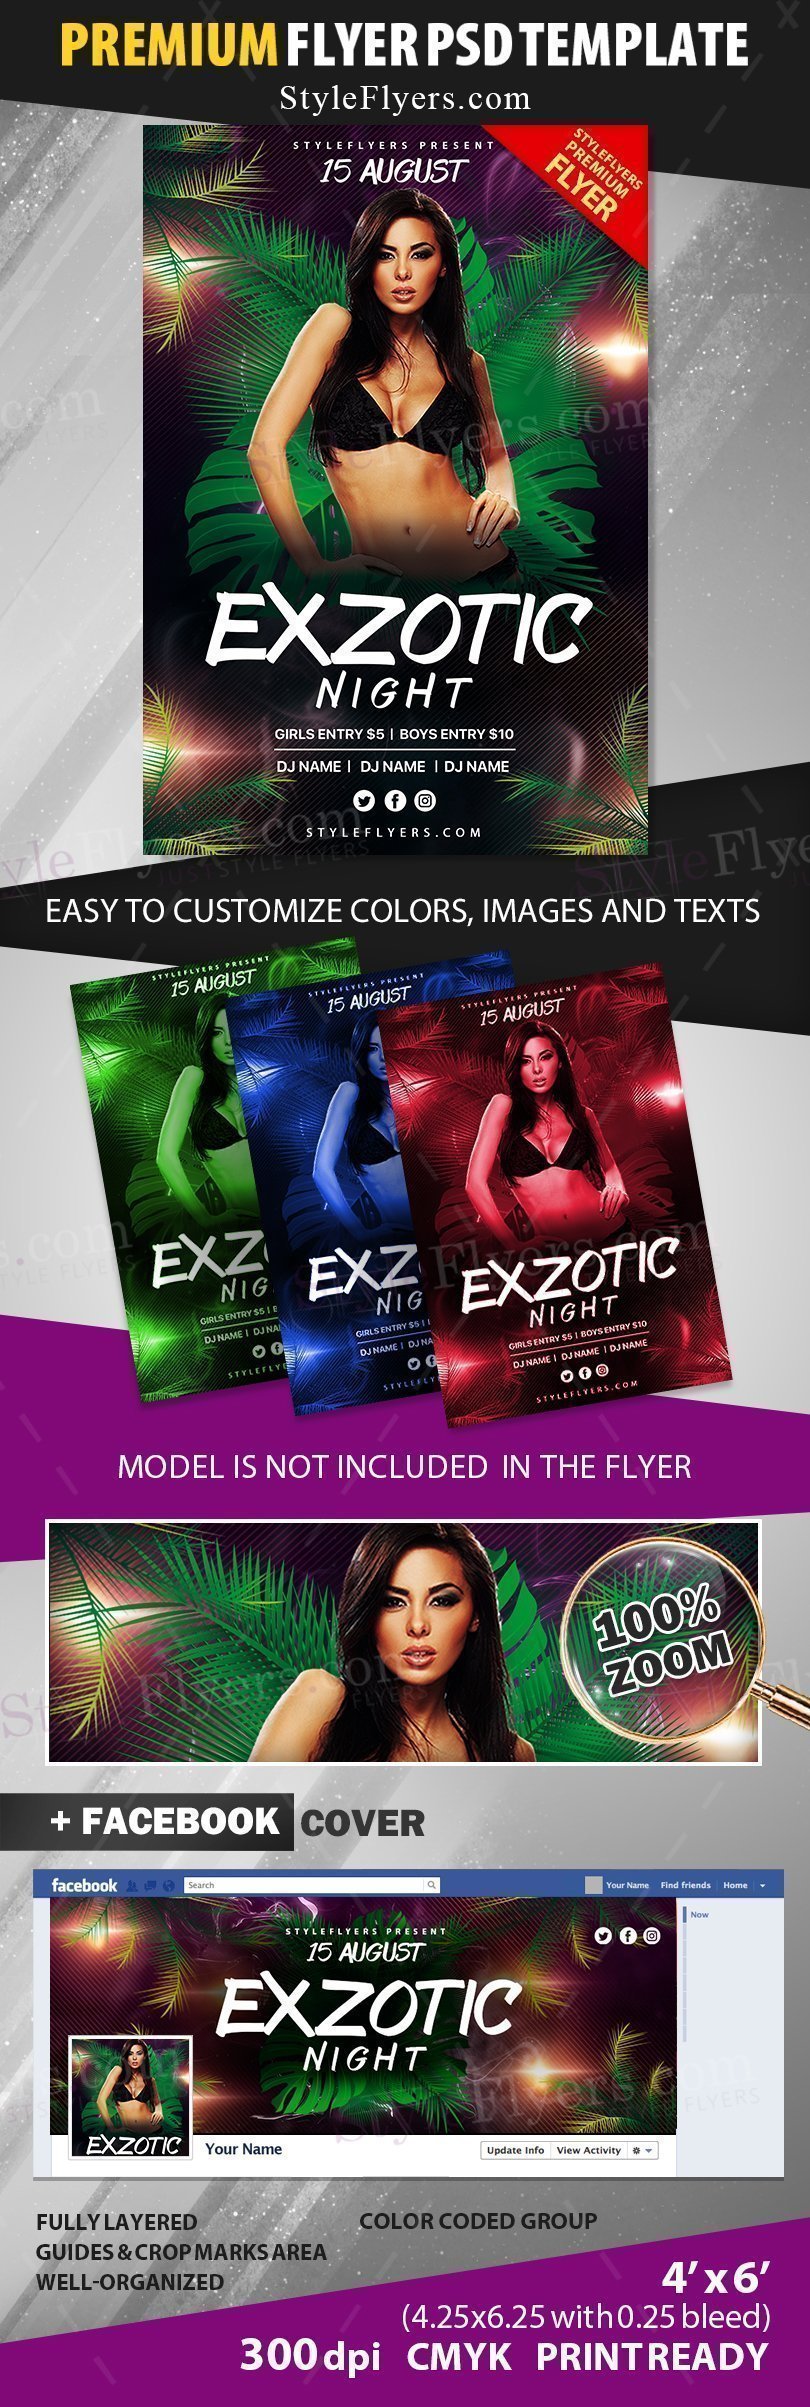 preview_exzotic night_psd_flyer